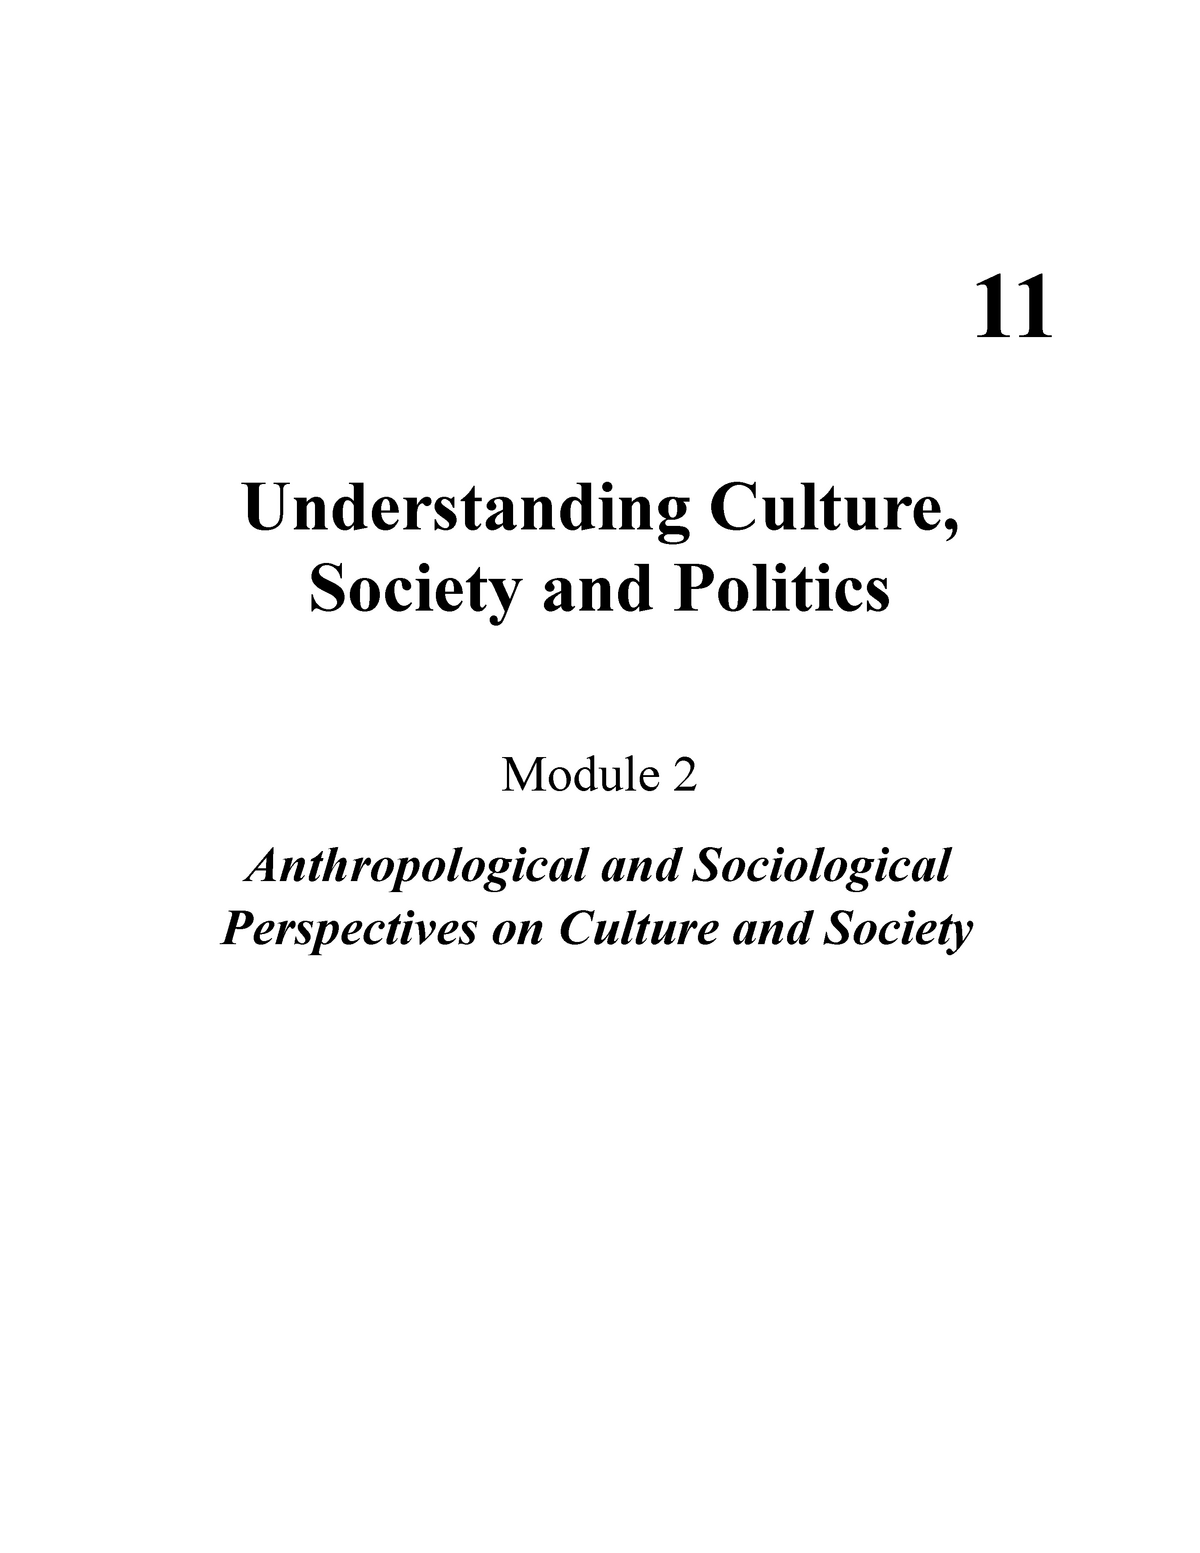 understanding culture society and politics essay questions